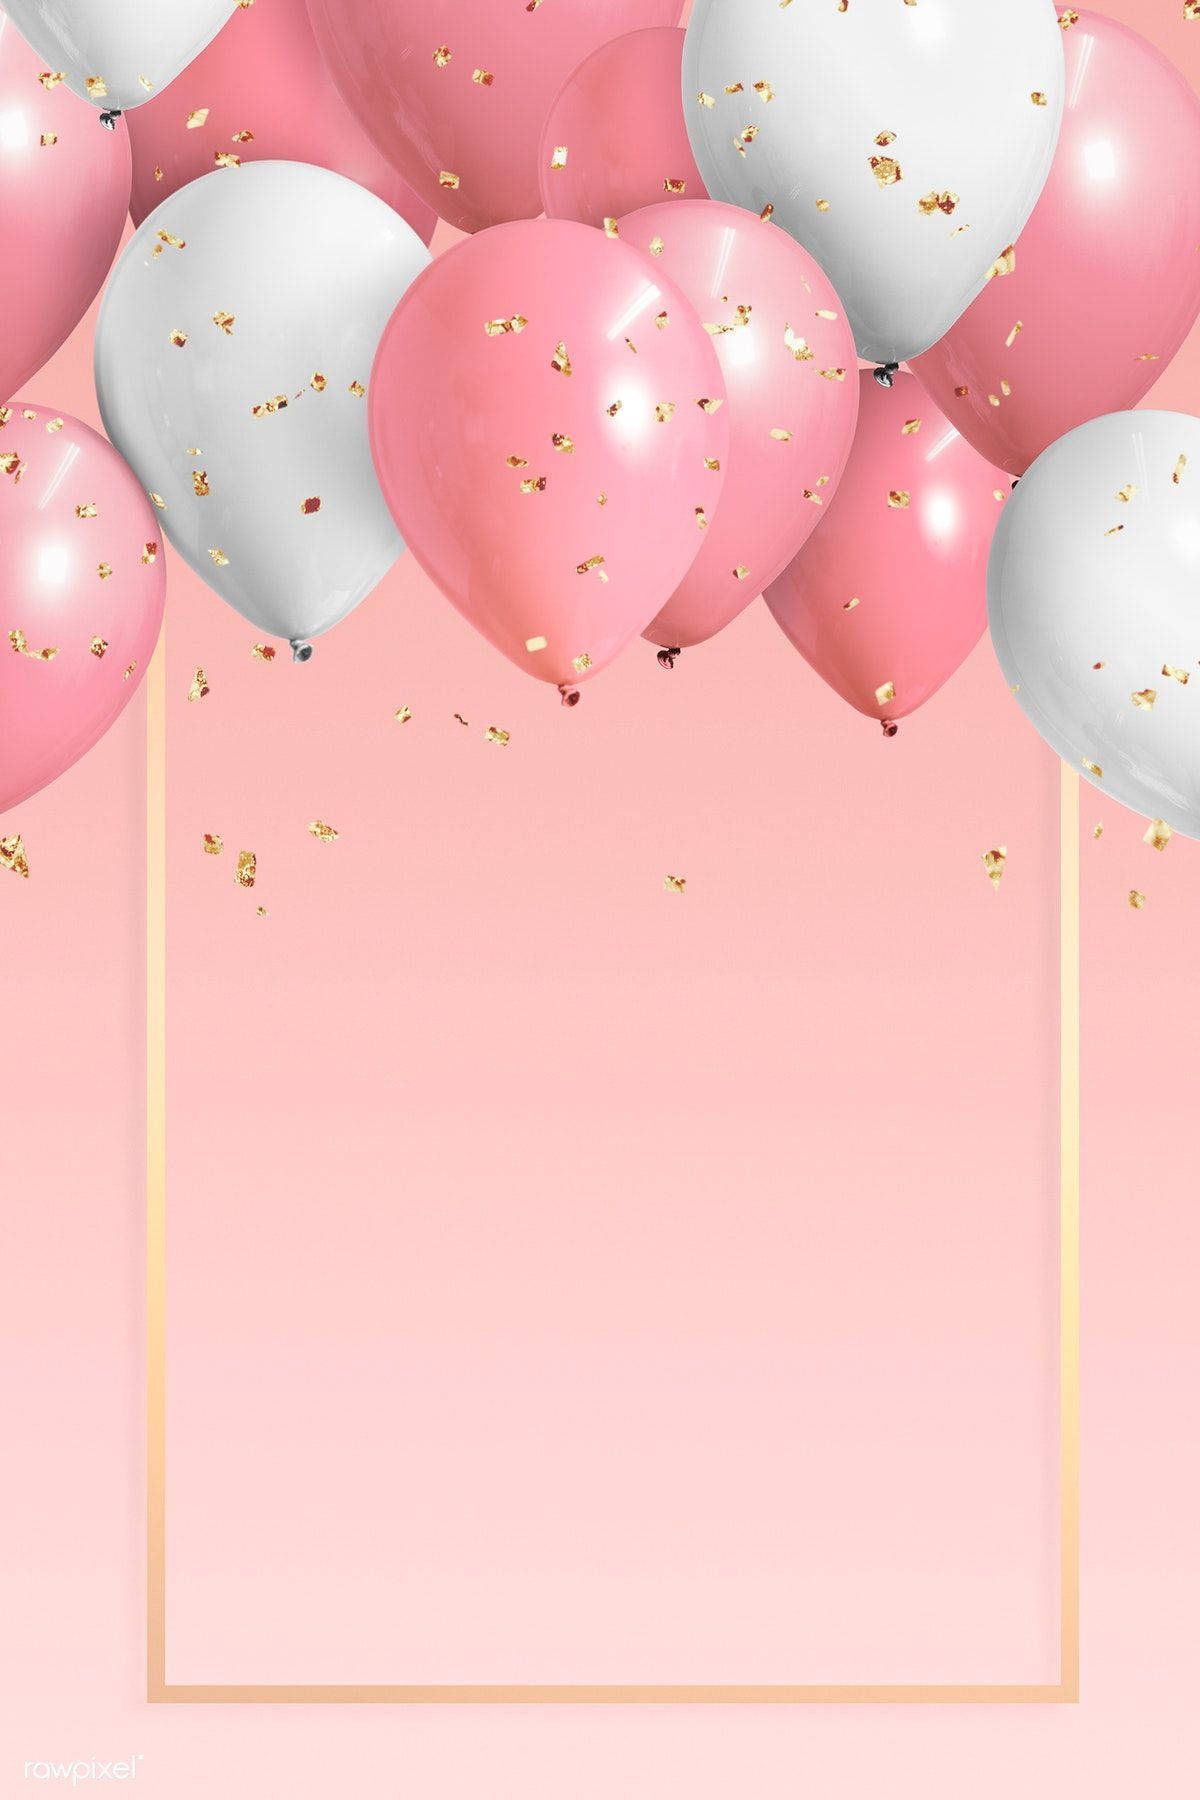 Download premium vector of Pink balloons on a pink background - Balloons, birthday